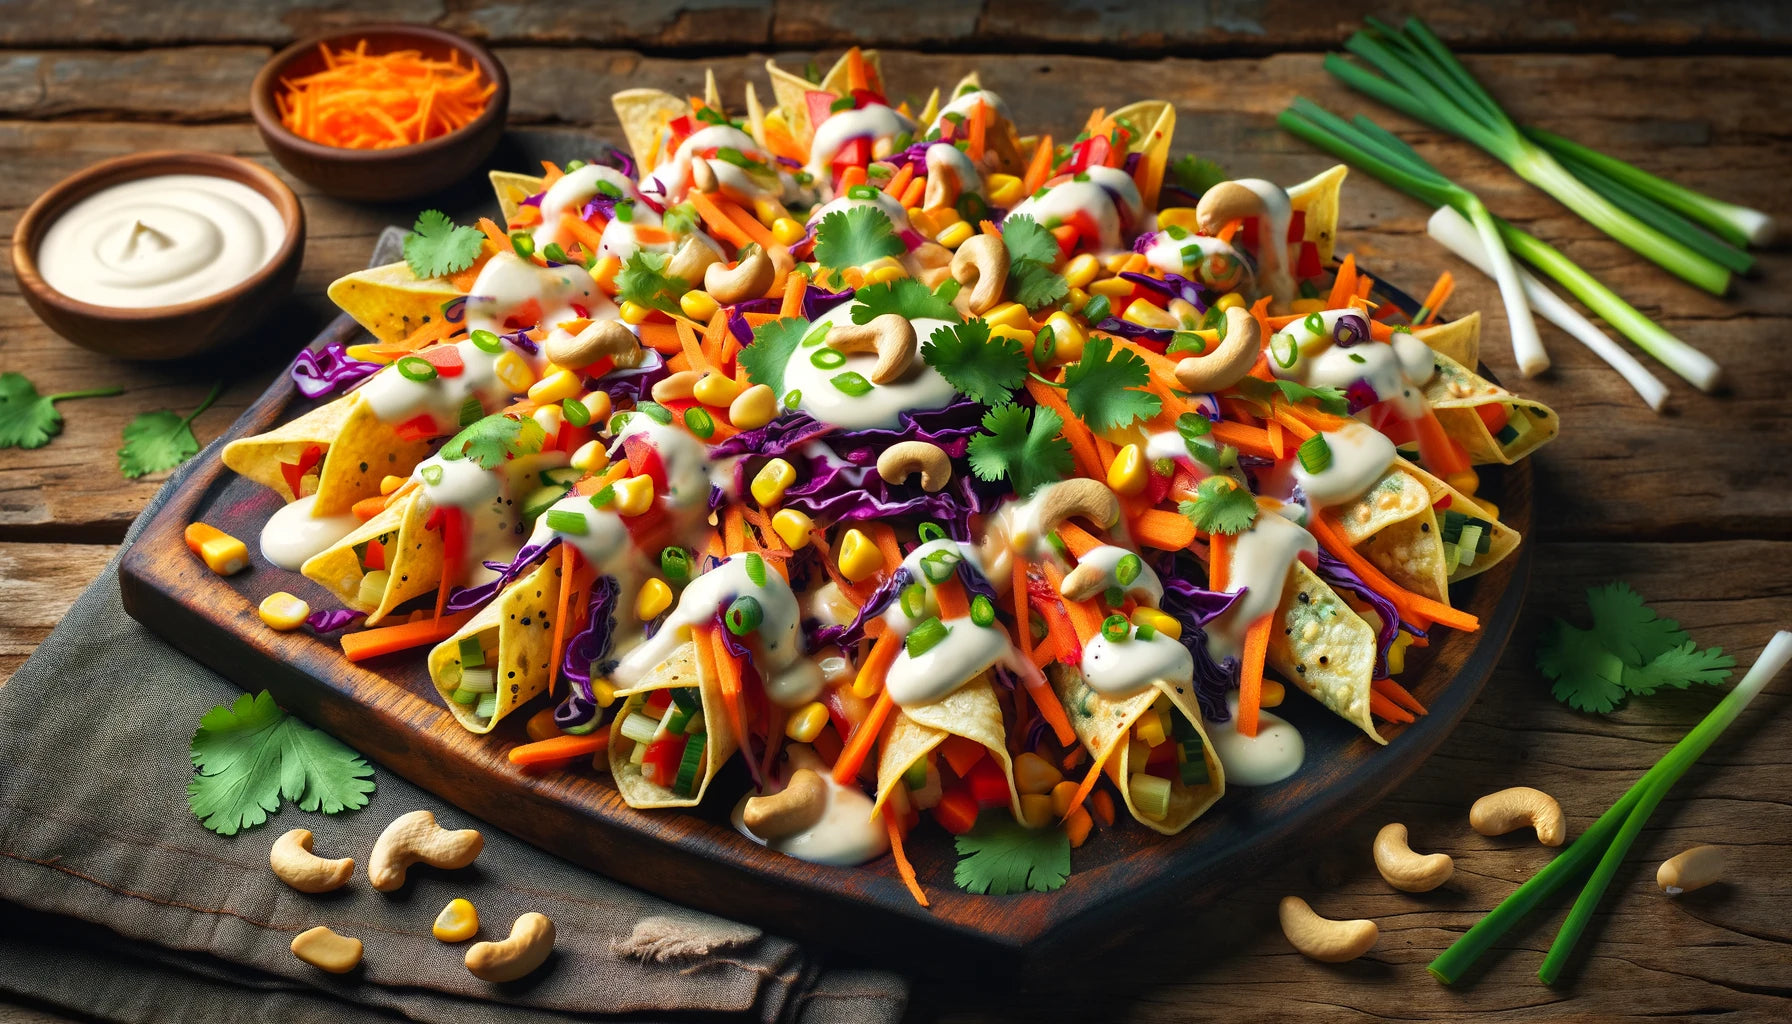 Asian Food Spring Roll Nachos Recipe: Vegetarian Delight on the Arteflame Grill